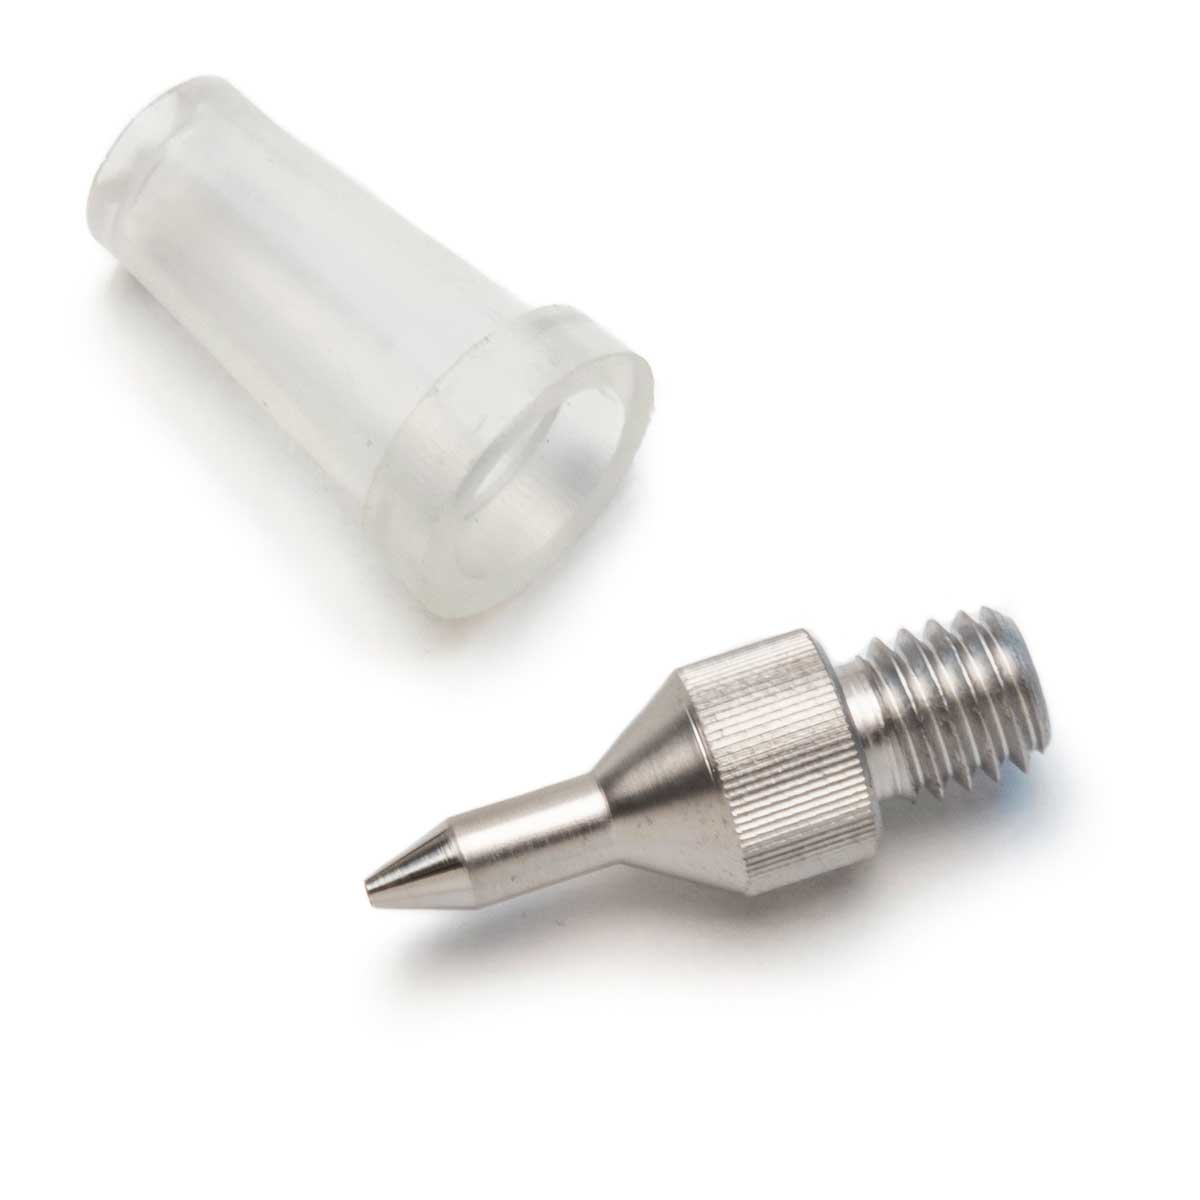 Replacement Tips for Reusable Rapid Biopsy Punch-504641